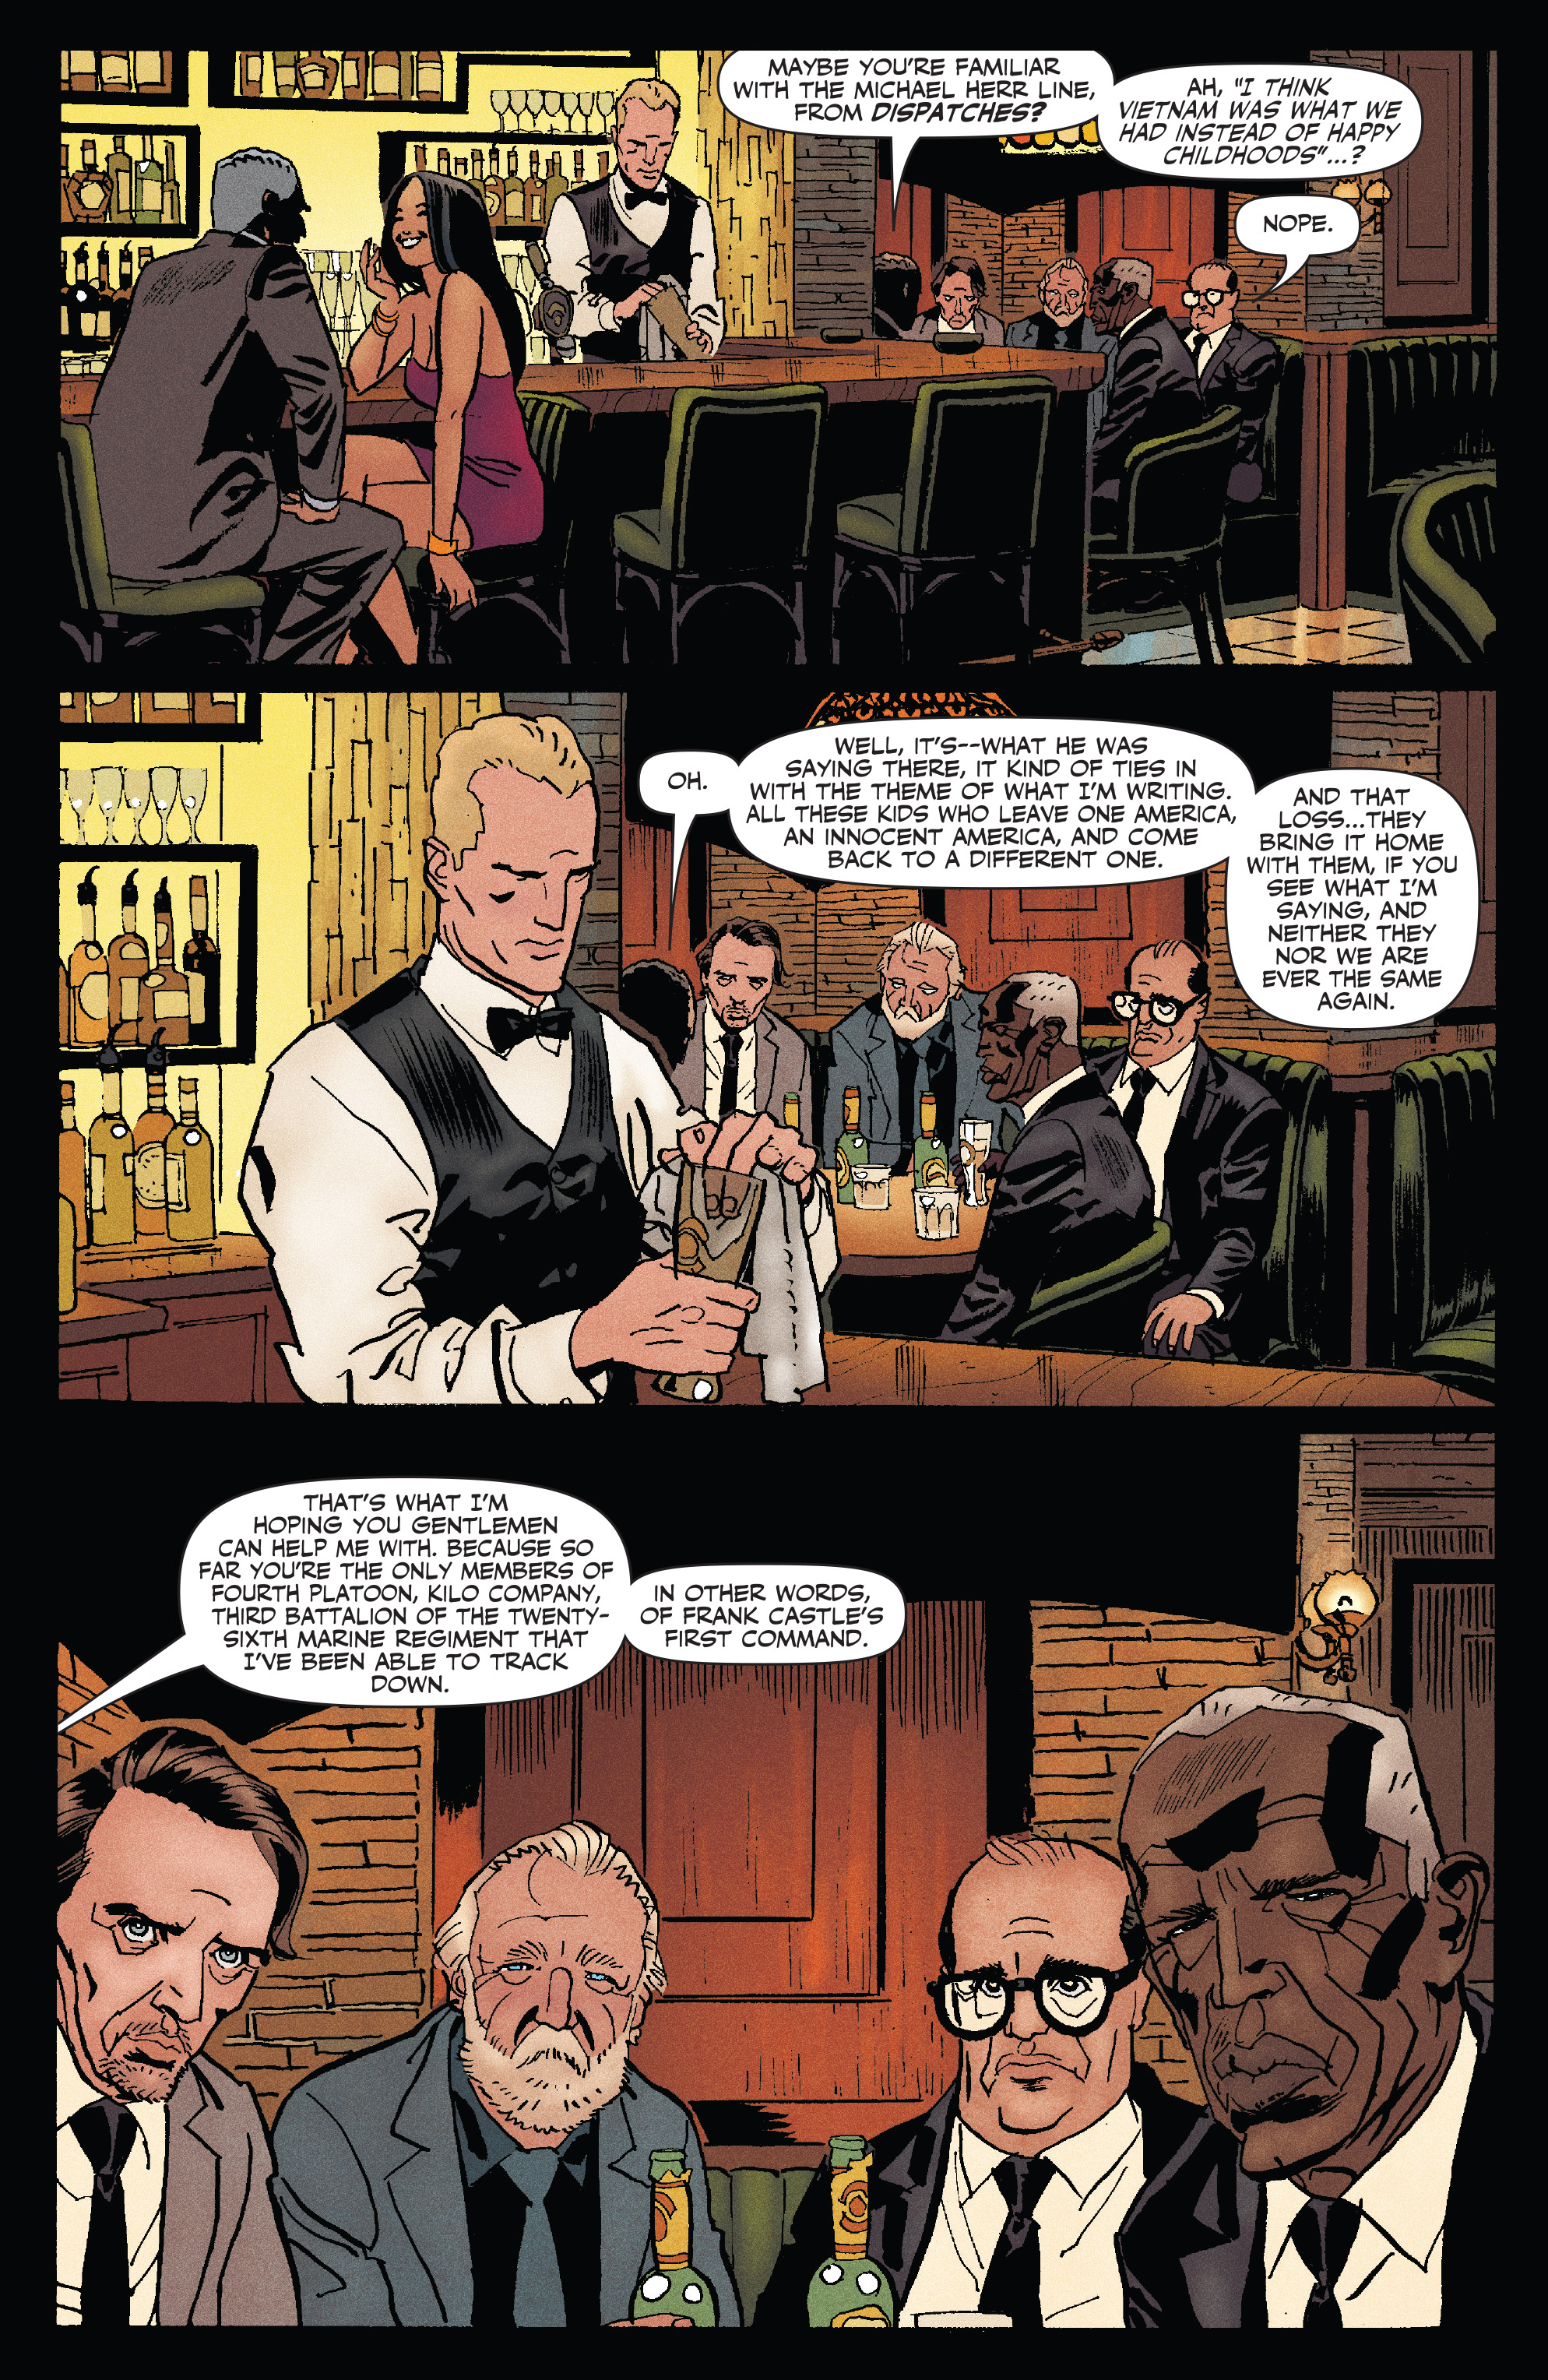 Punisher: The Platoon (2017): Chapter 1 - Page 2